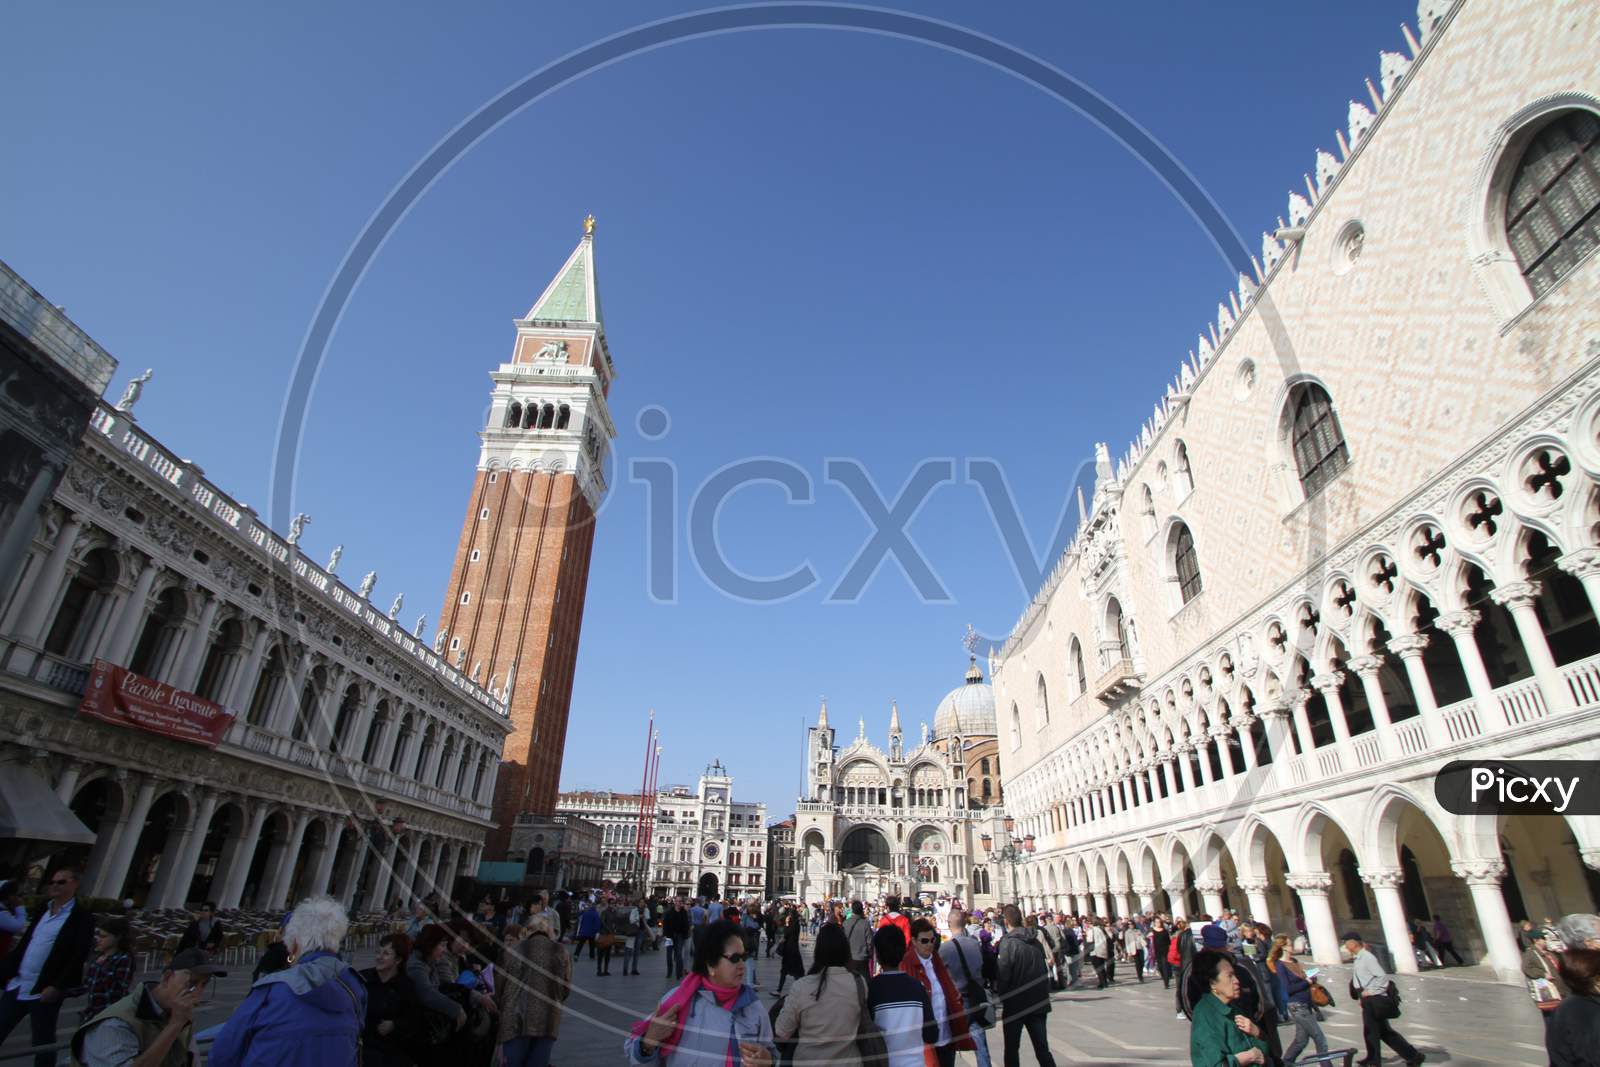 View of St. Mark's Square